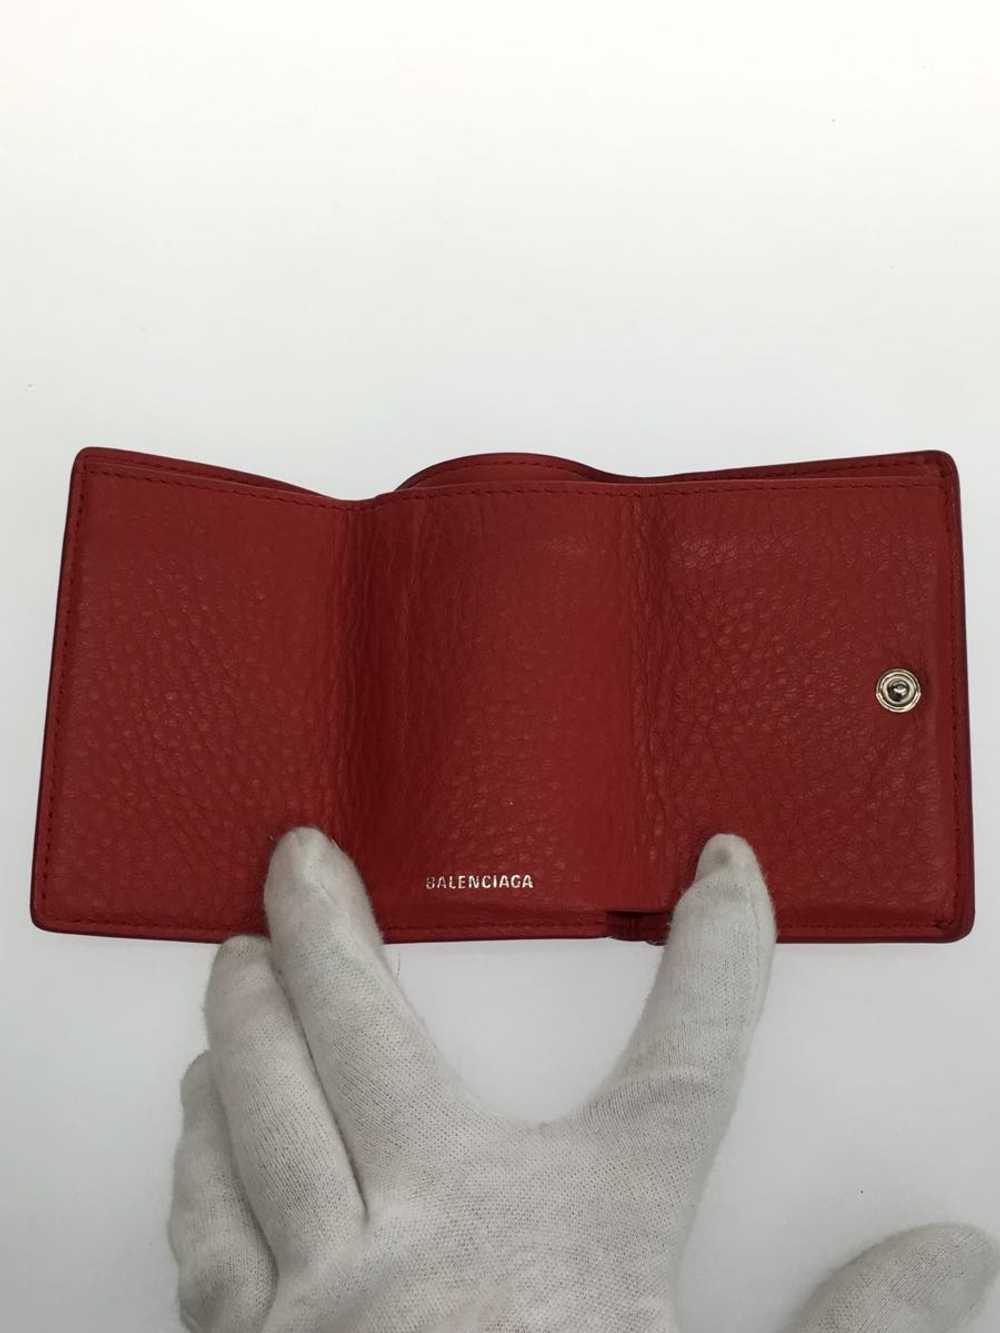 Balenciaga Trifold Wallet Leather Red Women - image 4